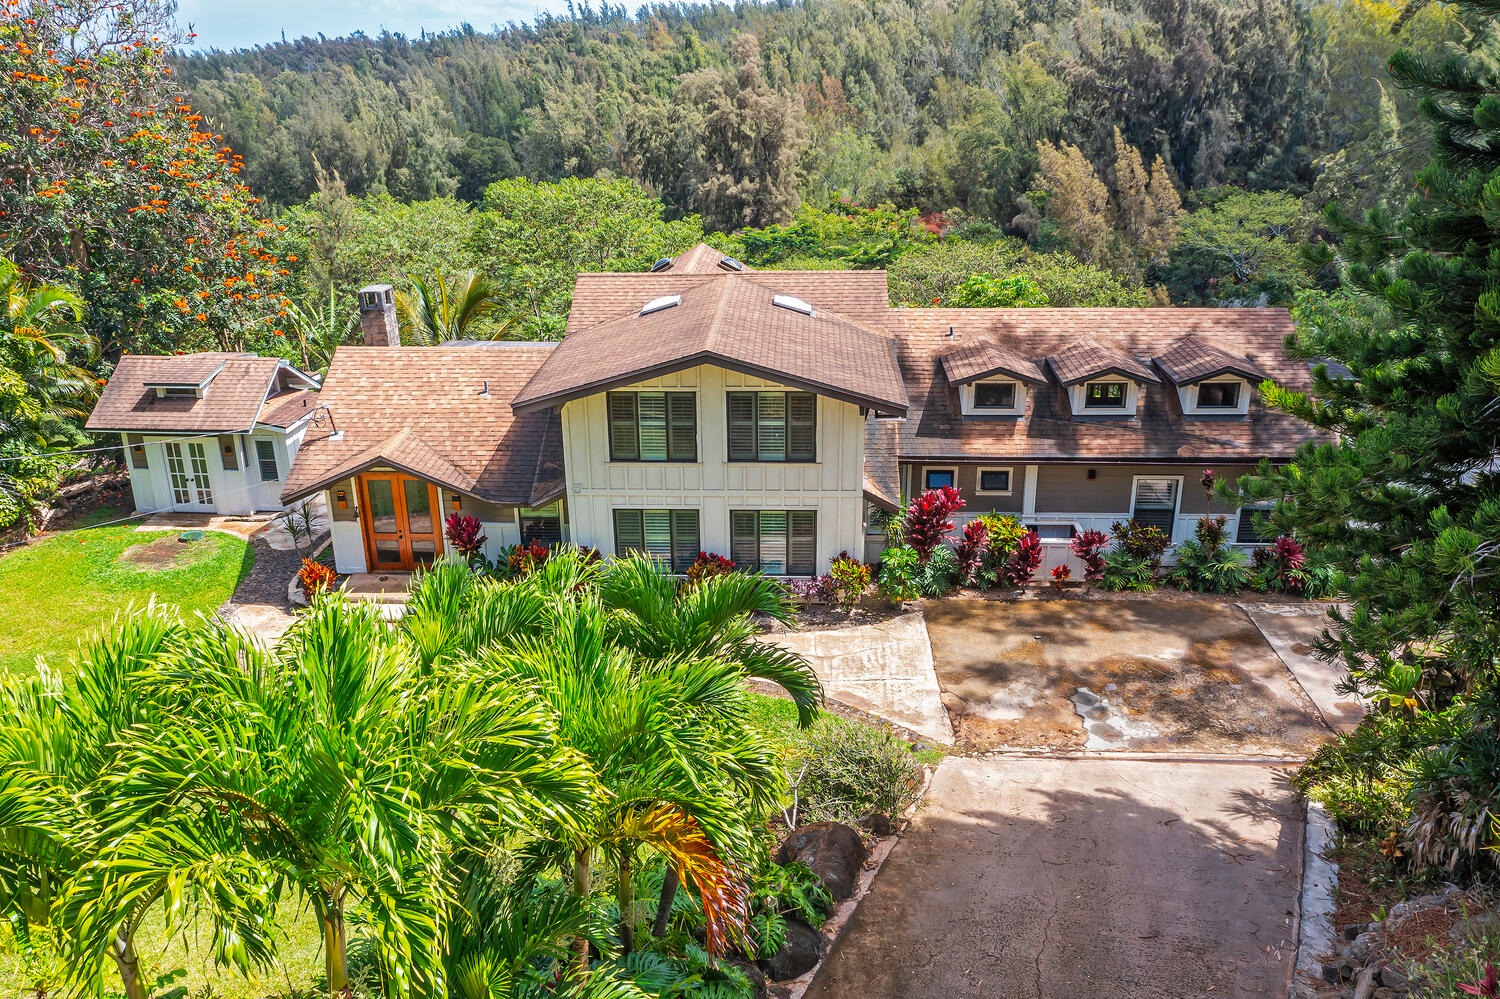 Haleiwa Vacation Rentals, Mele Makana - This home sits just above the 7 famous miles of Oahu’s infamous North Shore beaches